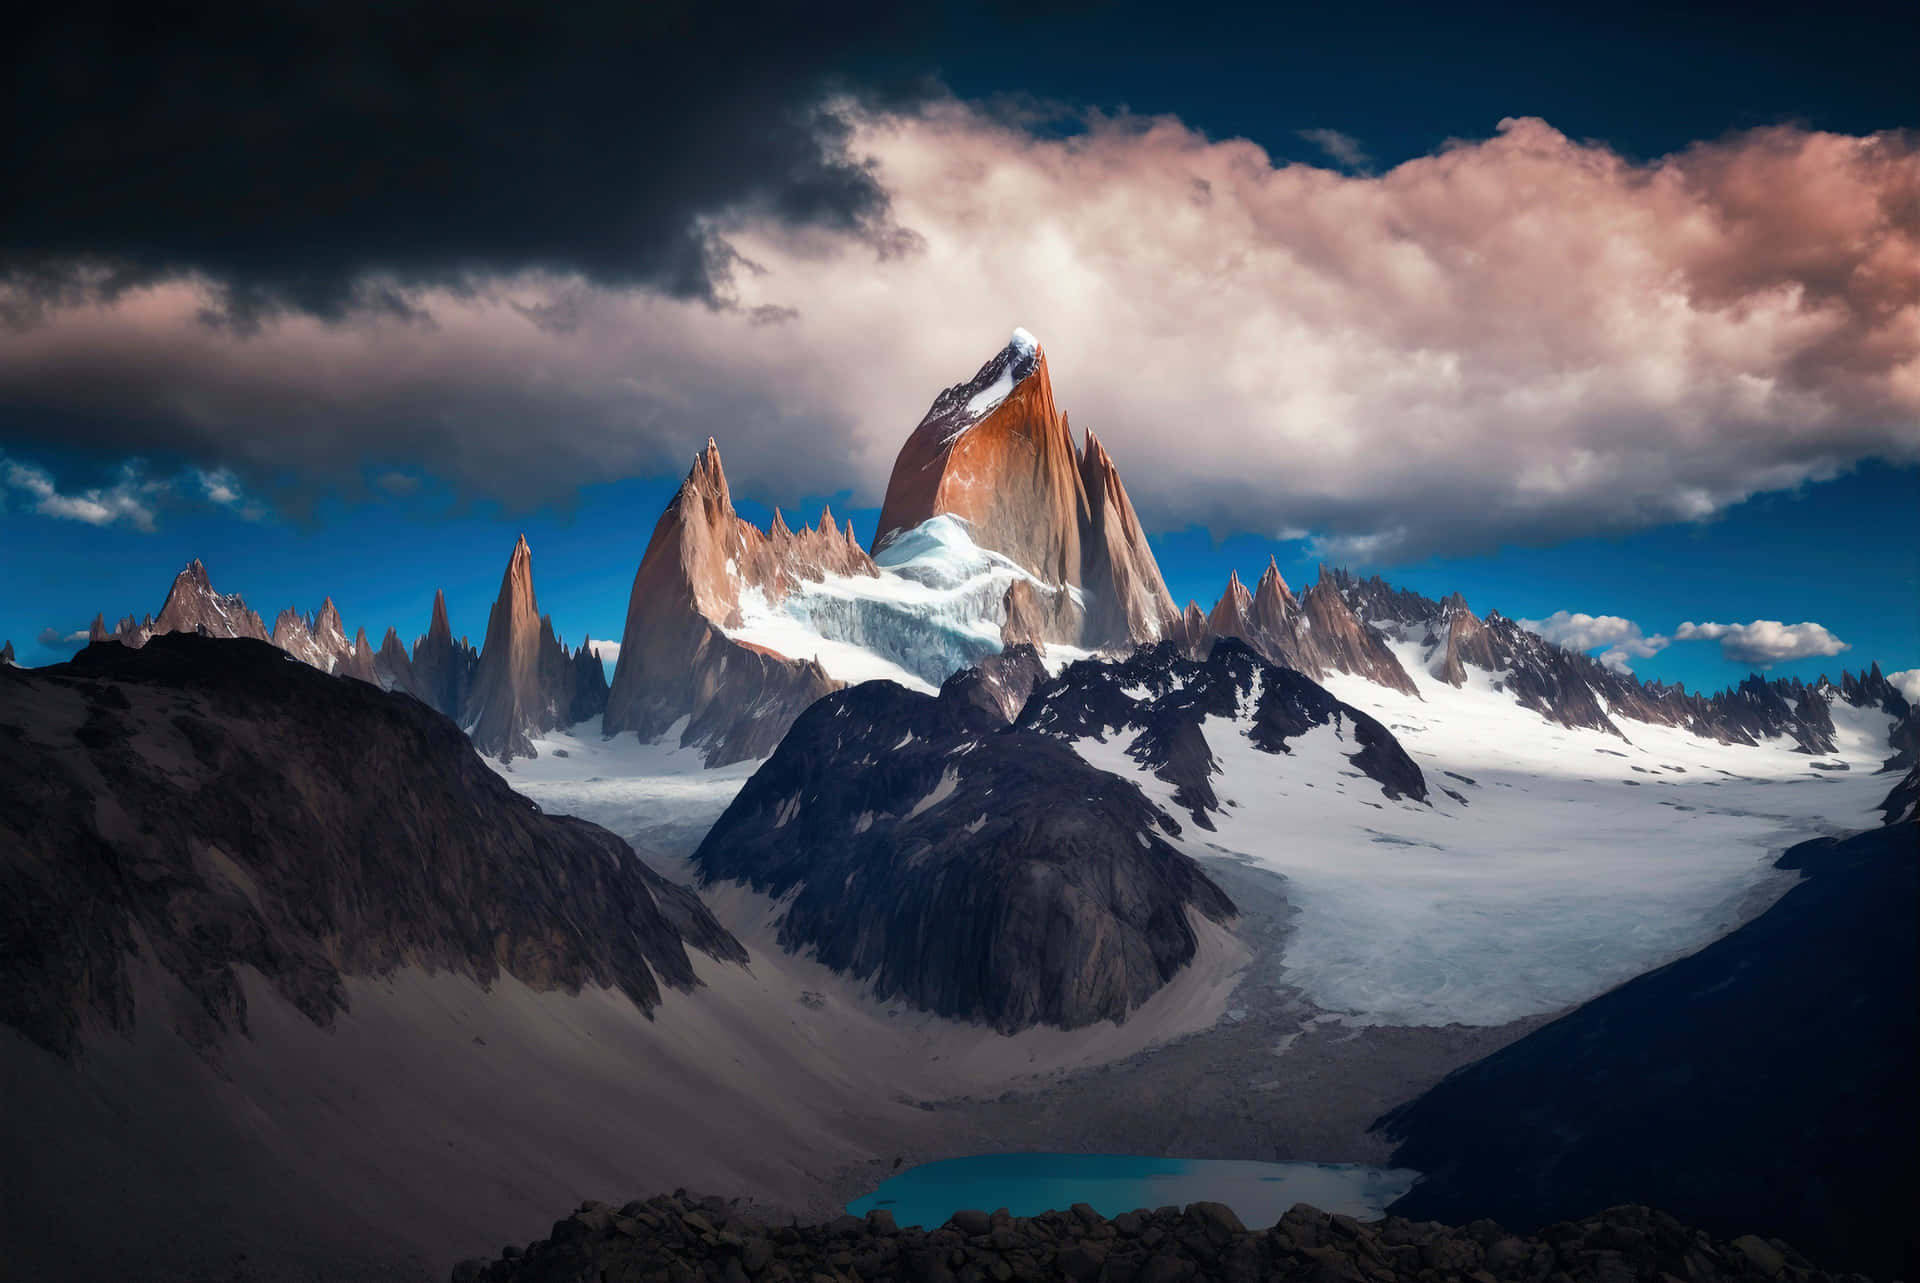 Enjoy pure nature with a visit to Patagonia